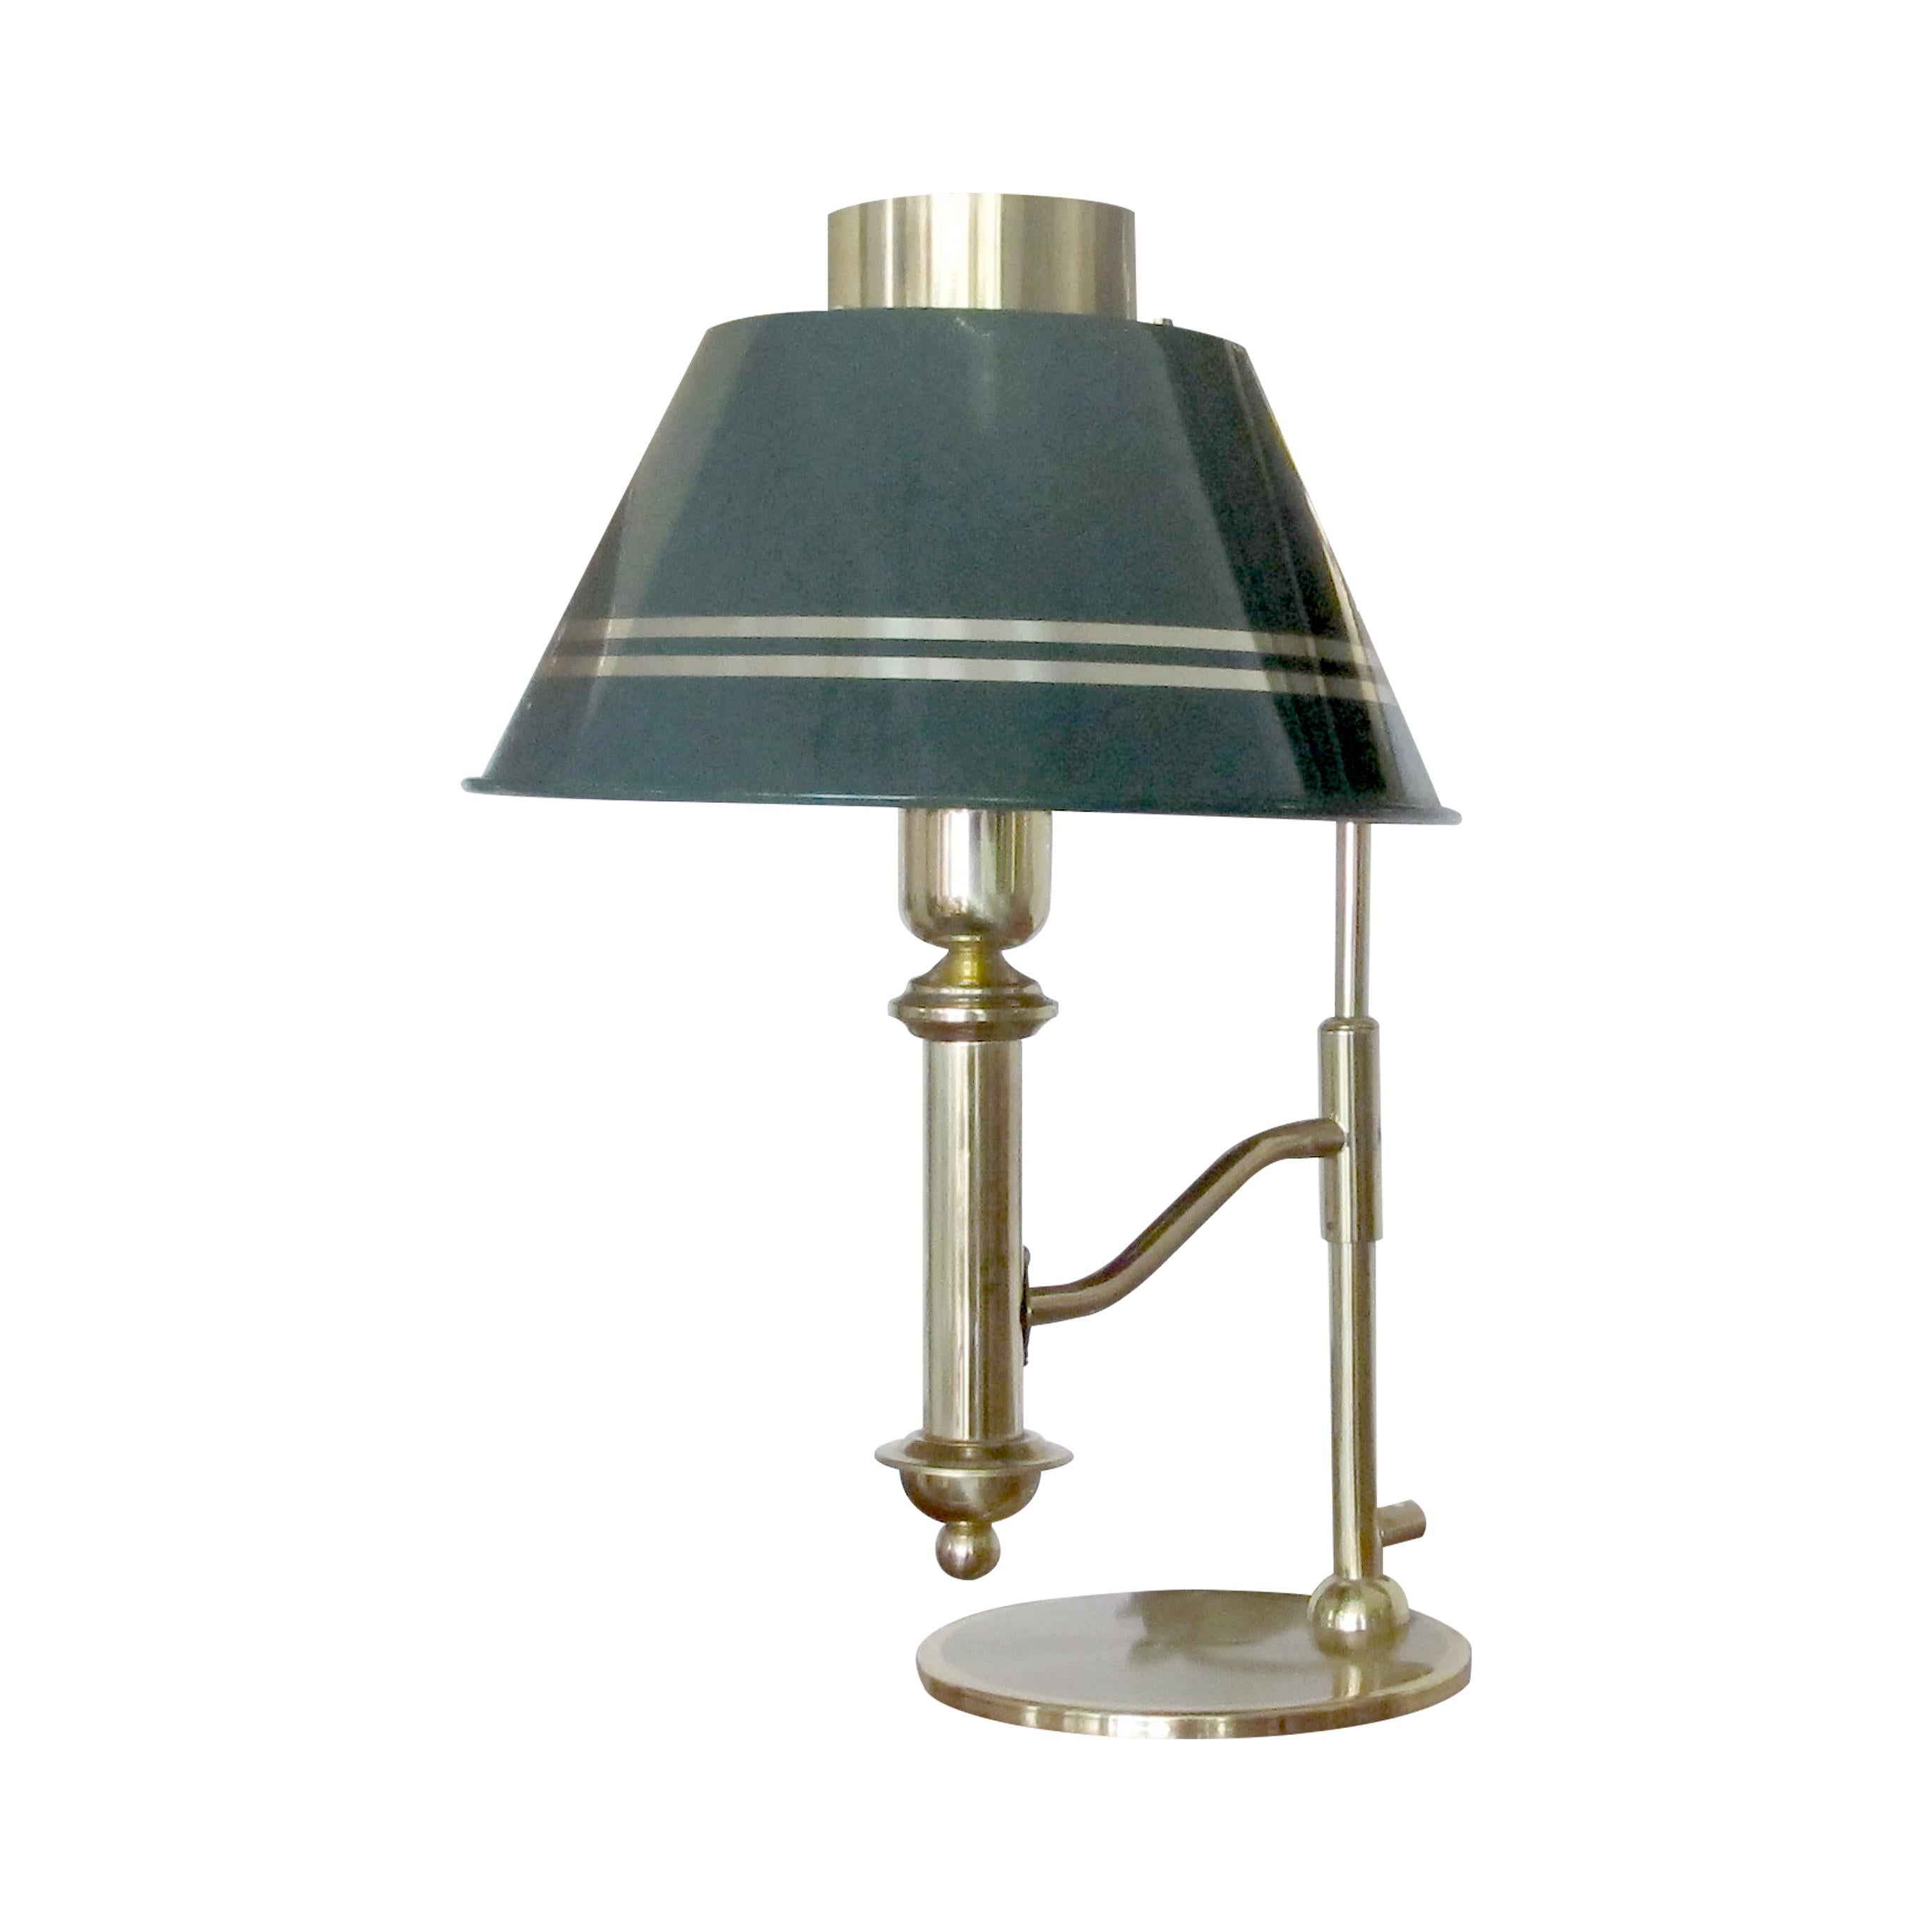 Mid-Century Modern 1970s Large Brass Desk Table Lamp with Green Metal Shade, Swedish For Sale